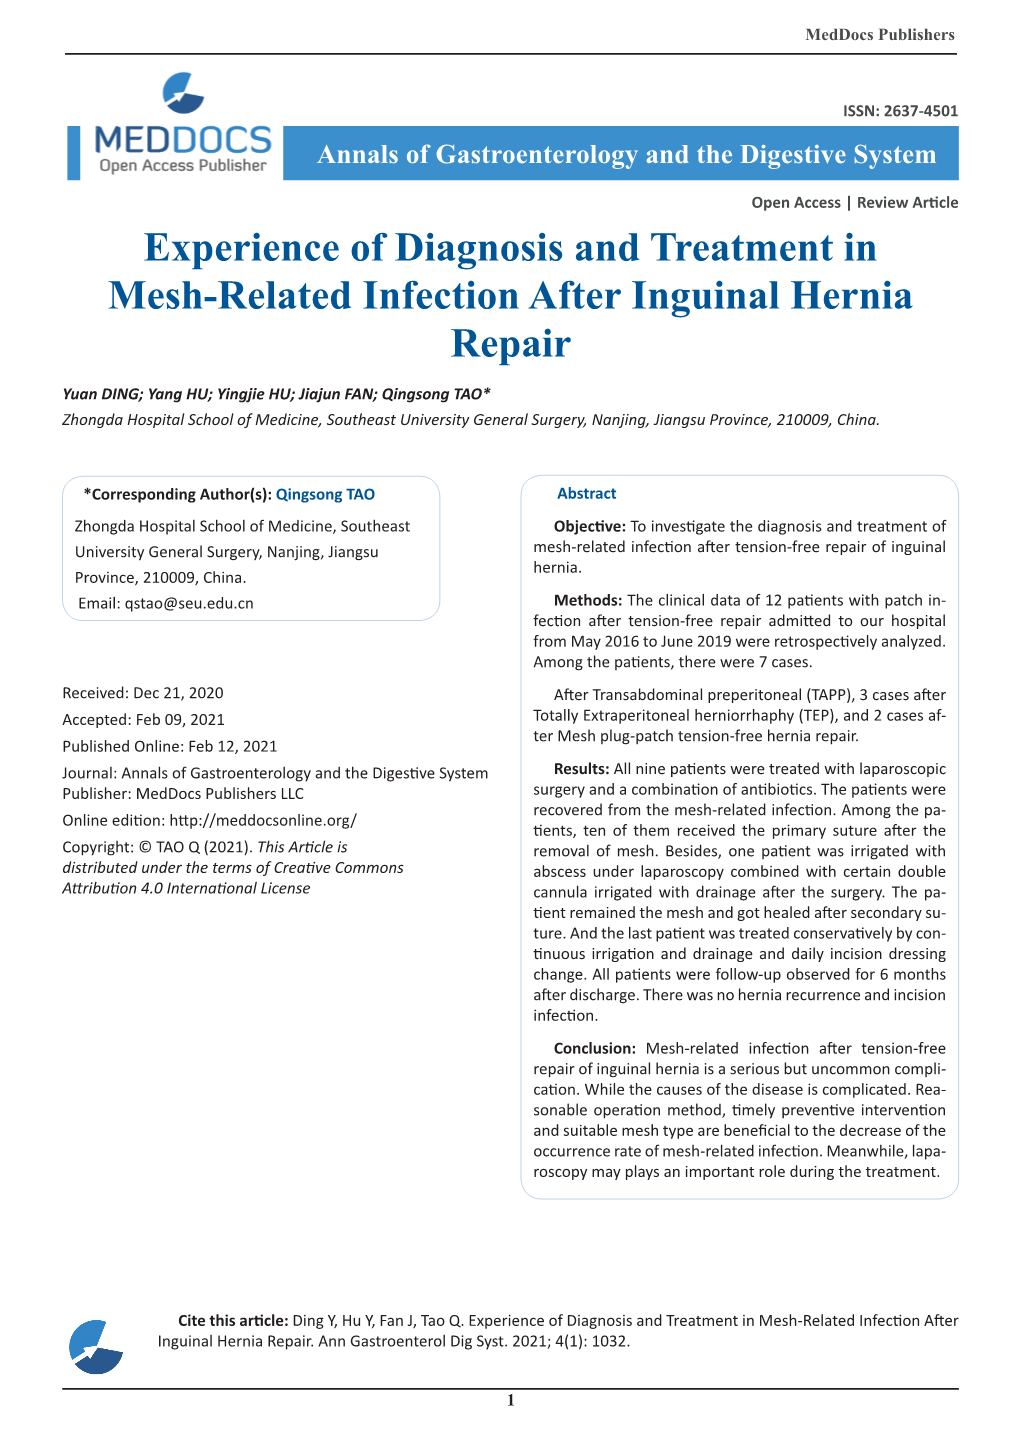 Experience of Diagnosis and Treatment in Mesh-Related Infection After Inguinal Hernia Repair